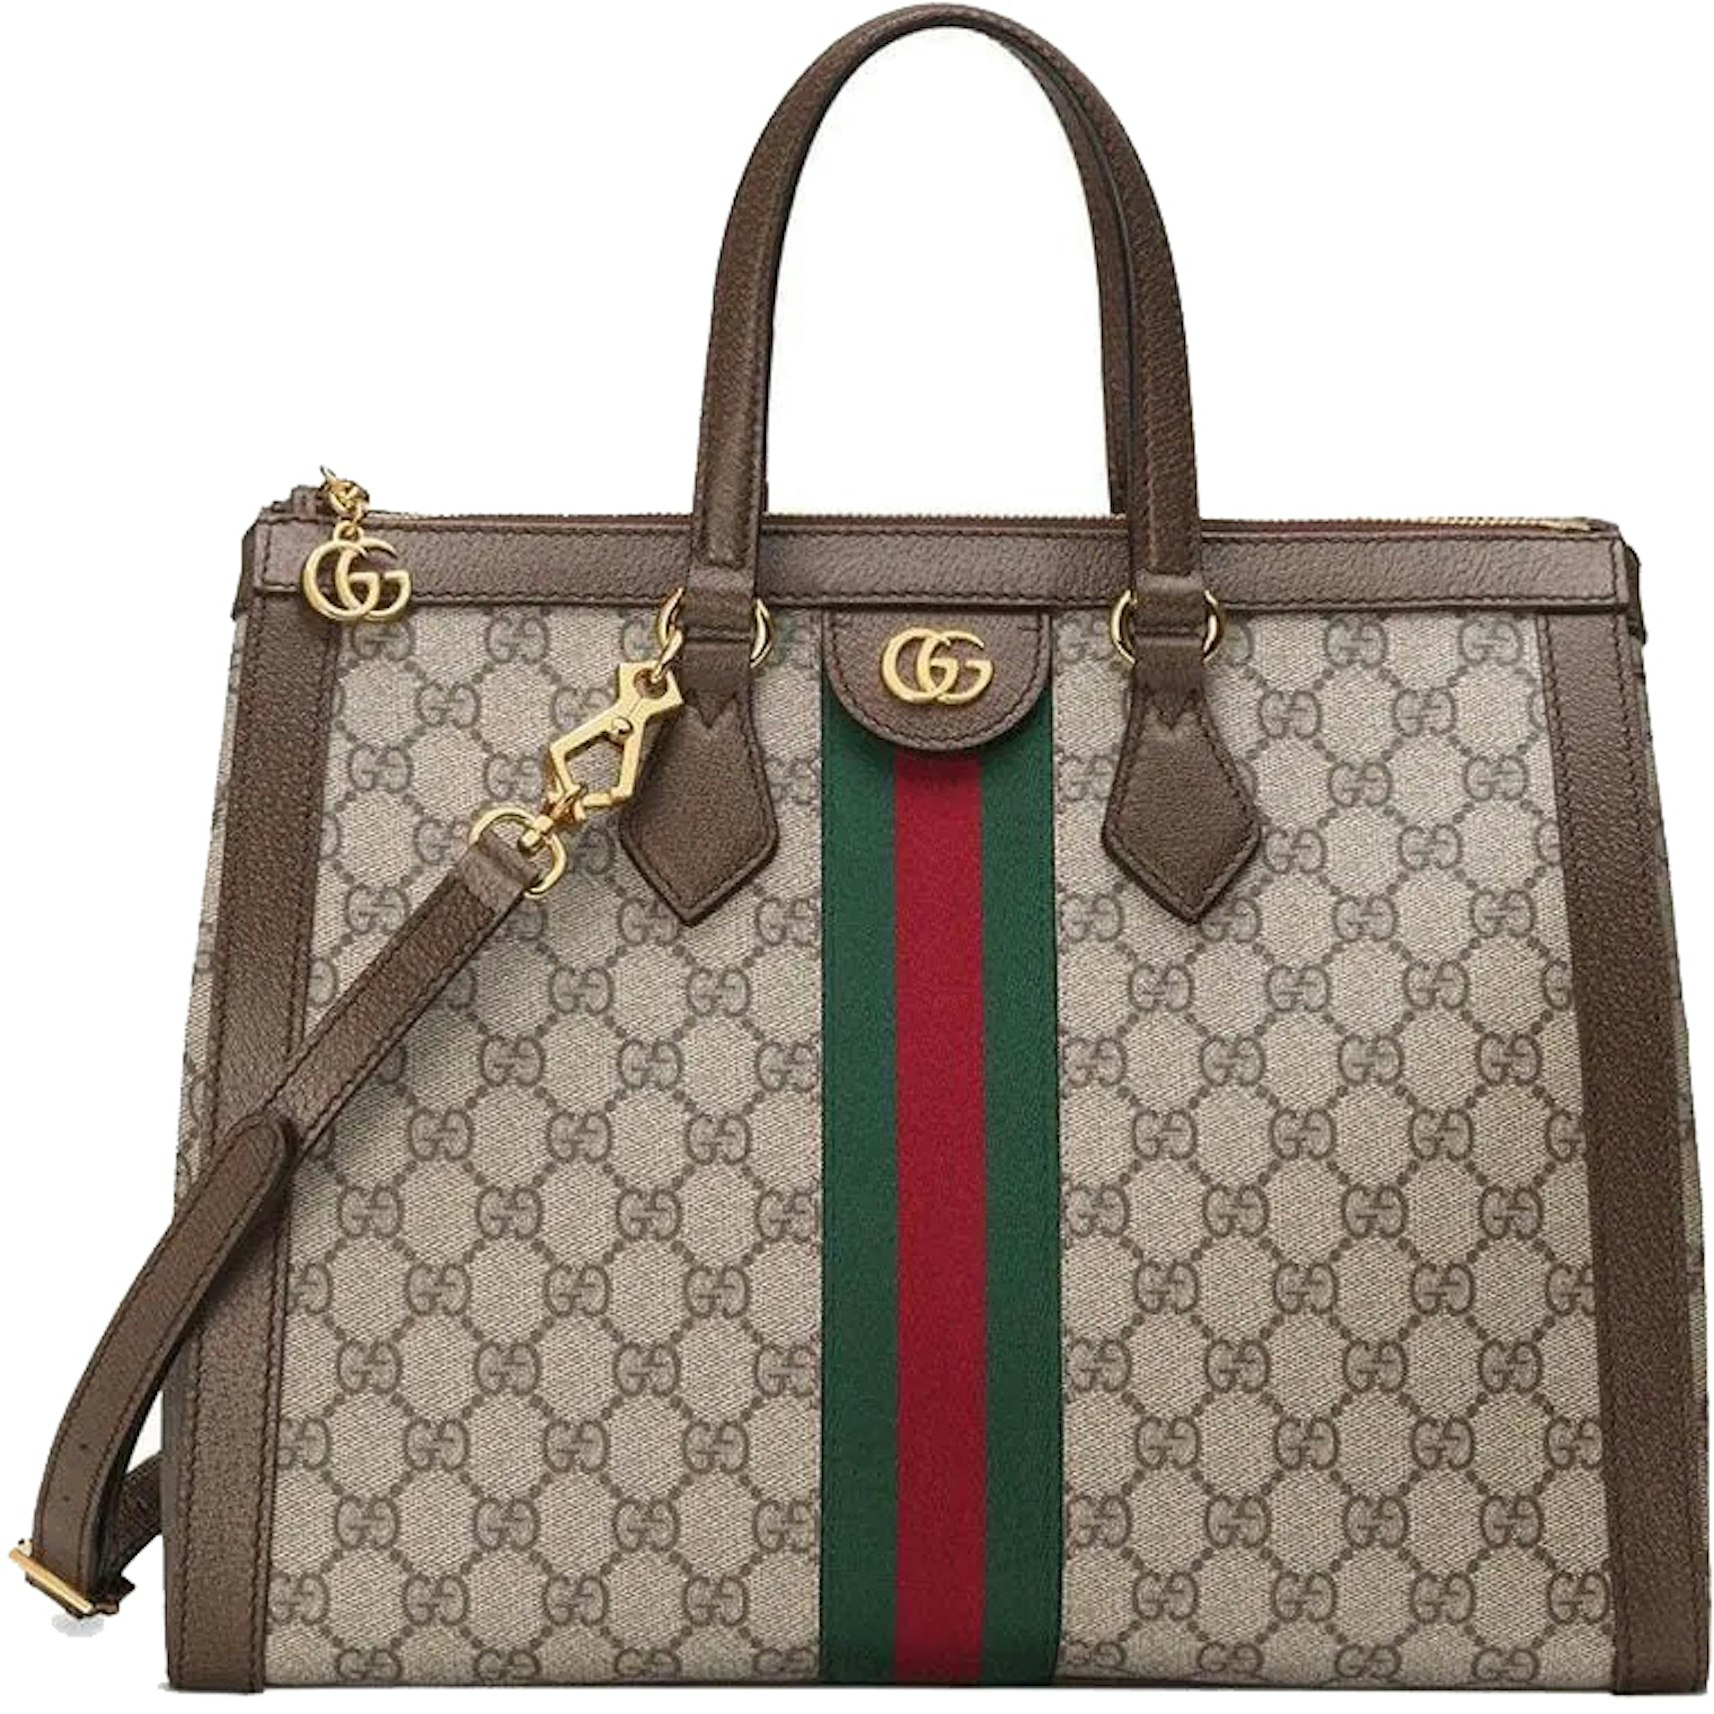 Gucci Ophidia GG Top Handle Bag Medium Beige/Ebony Coated Canvas/Leather with Gold-tone US